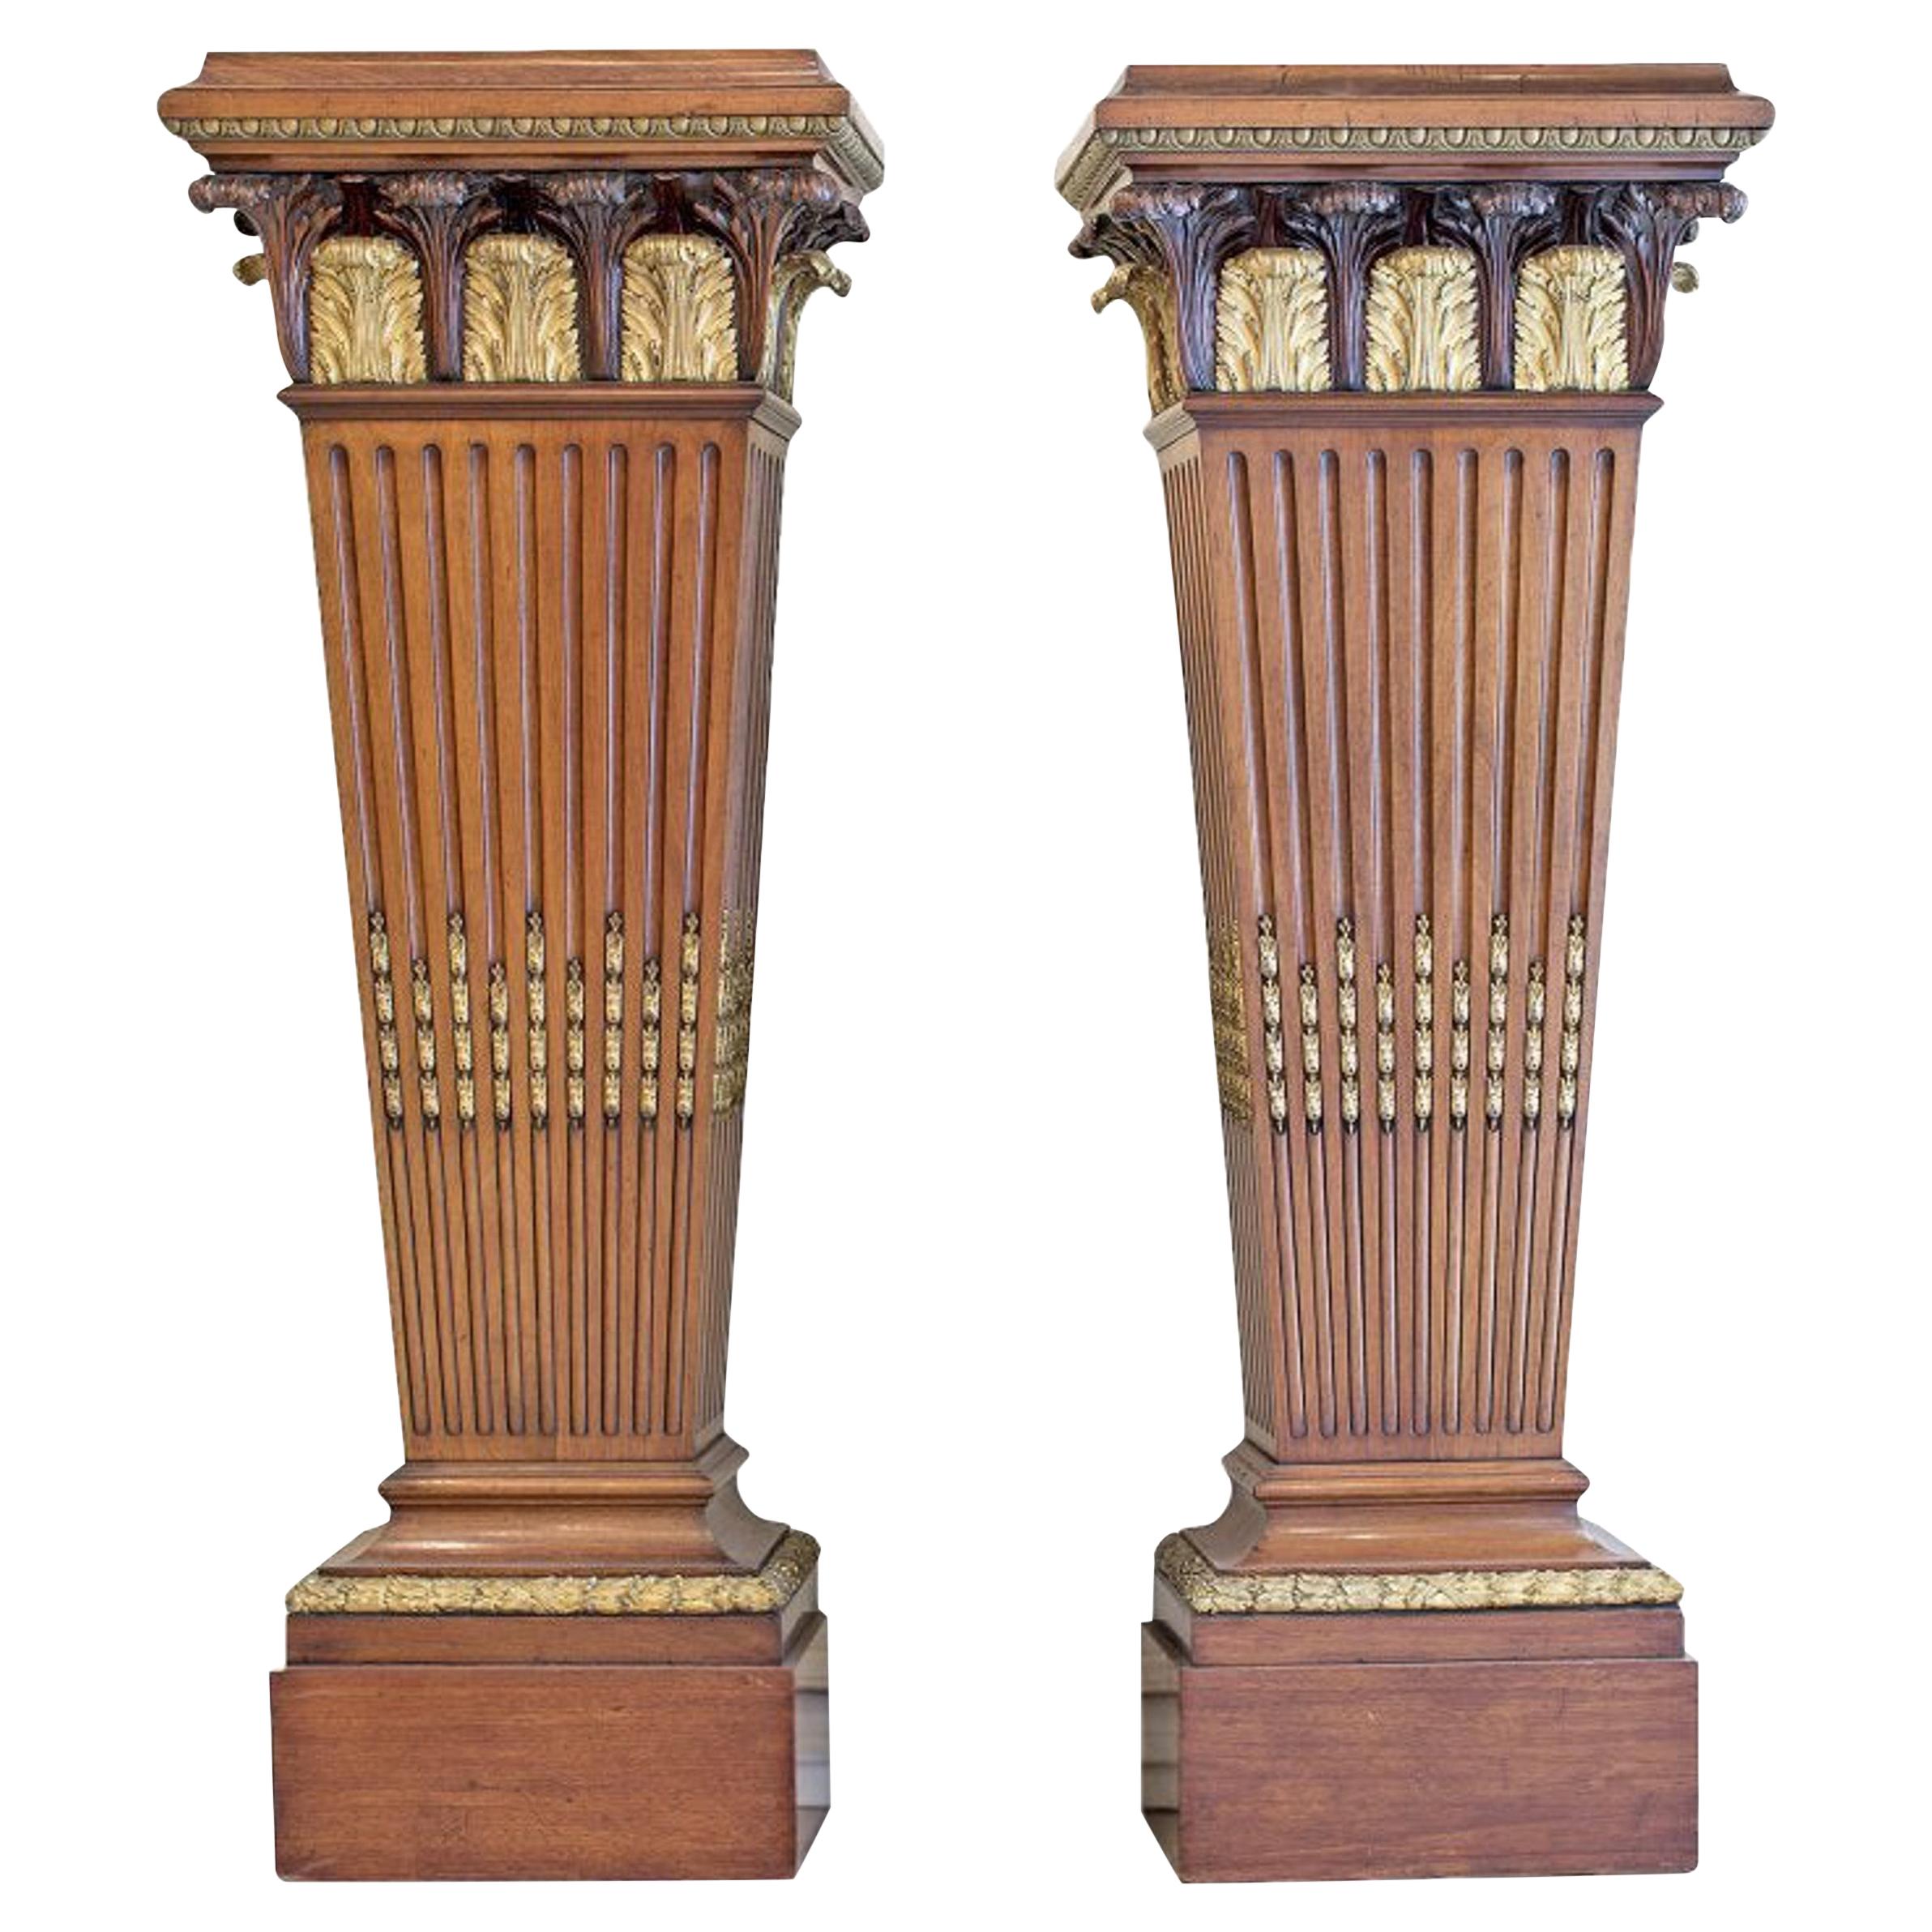 Very Large Pair of Neoclassical Style Ormolu Mounted Mahogany Pedestals